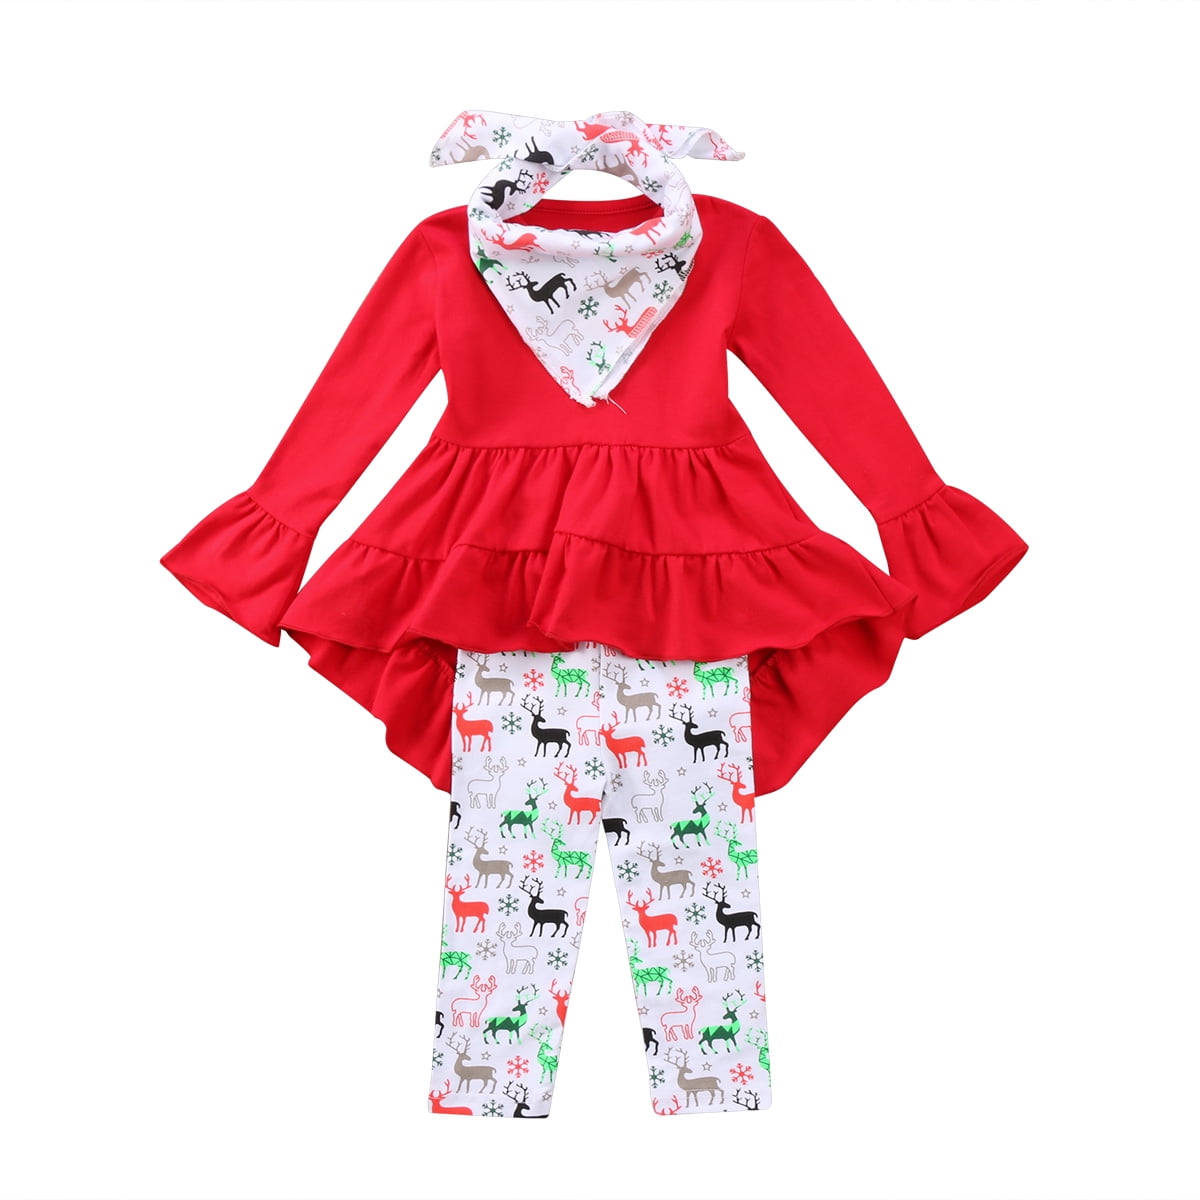 1-5Y Infant Baby Toddler Girl Floral Stripe Hooded Shirt Top & Pants Outfits Set